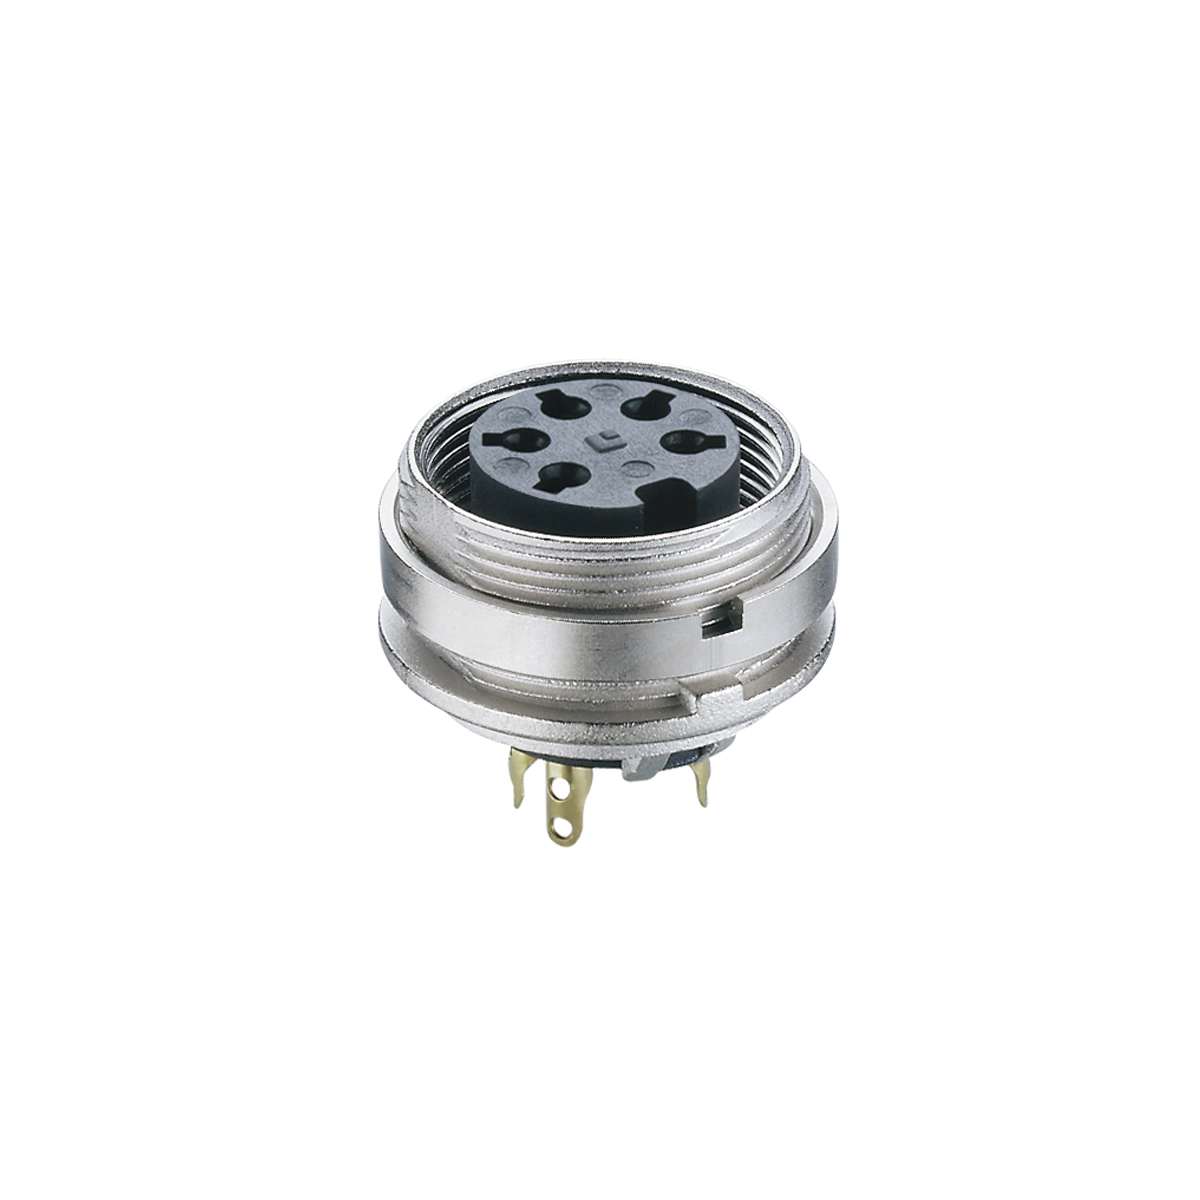 Lumberg: KGV (Series 03 | Circular connectors with threaded joint M16 acc. to IEC 61076-2-106, IP40/IP68)